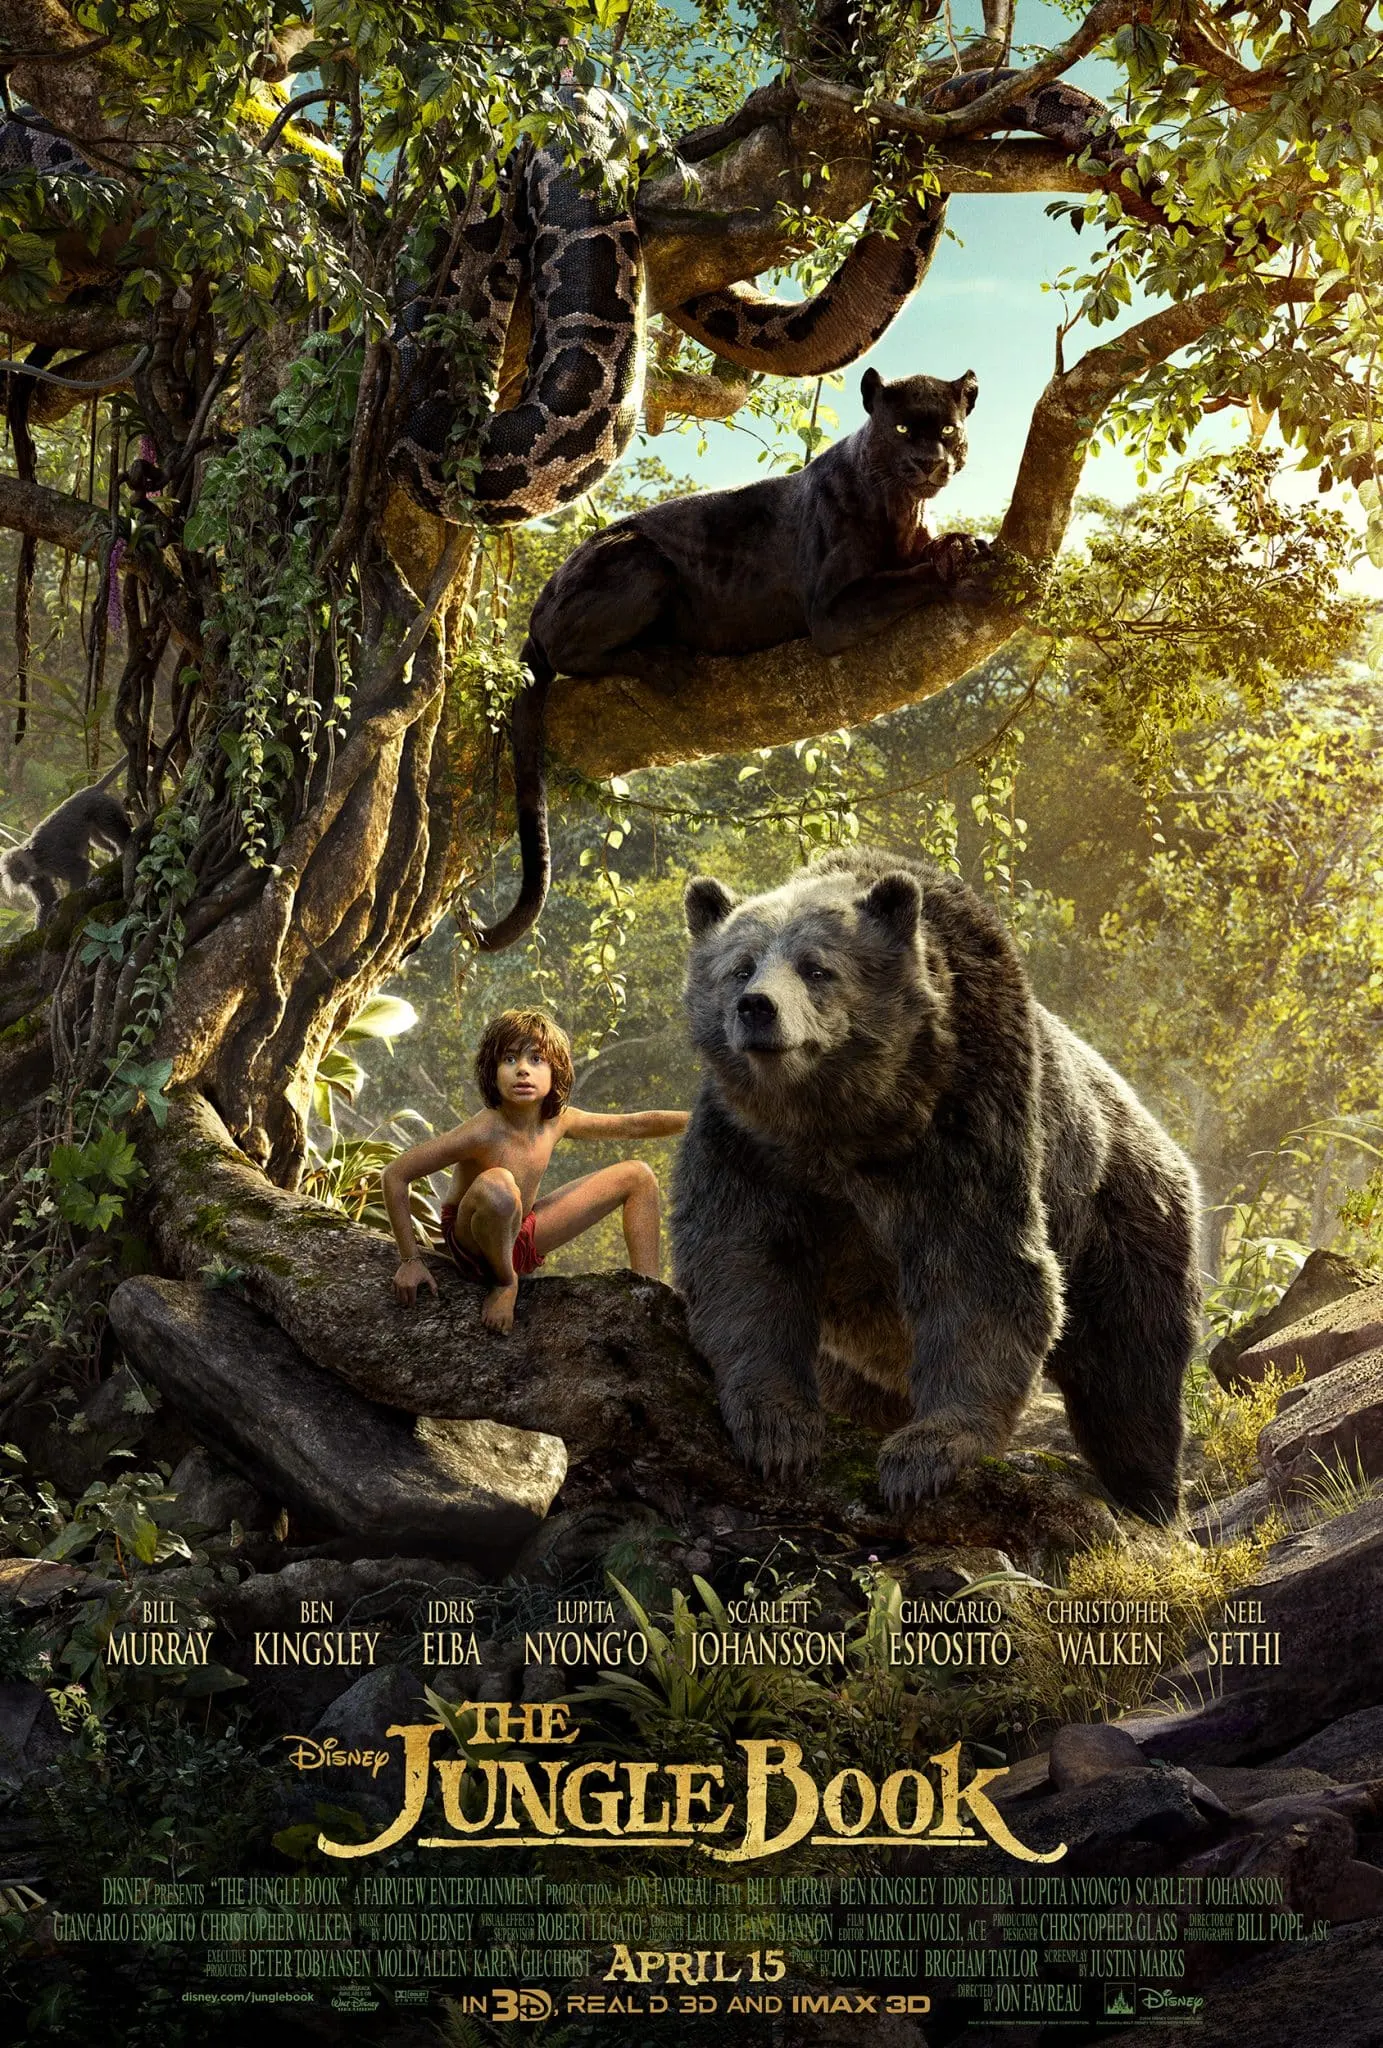 The Jungle Book in theaters TODAY (4/15)